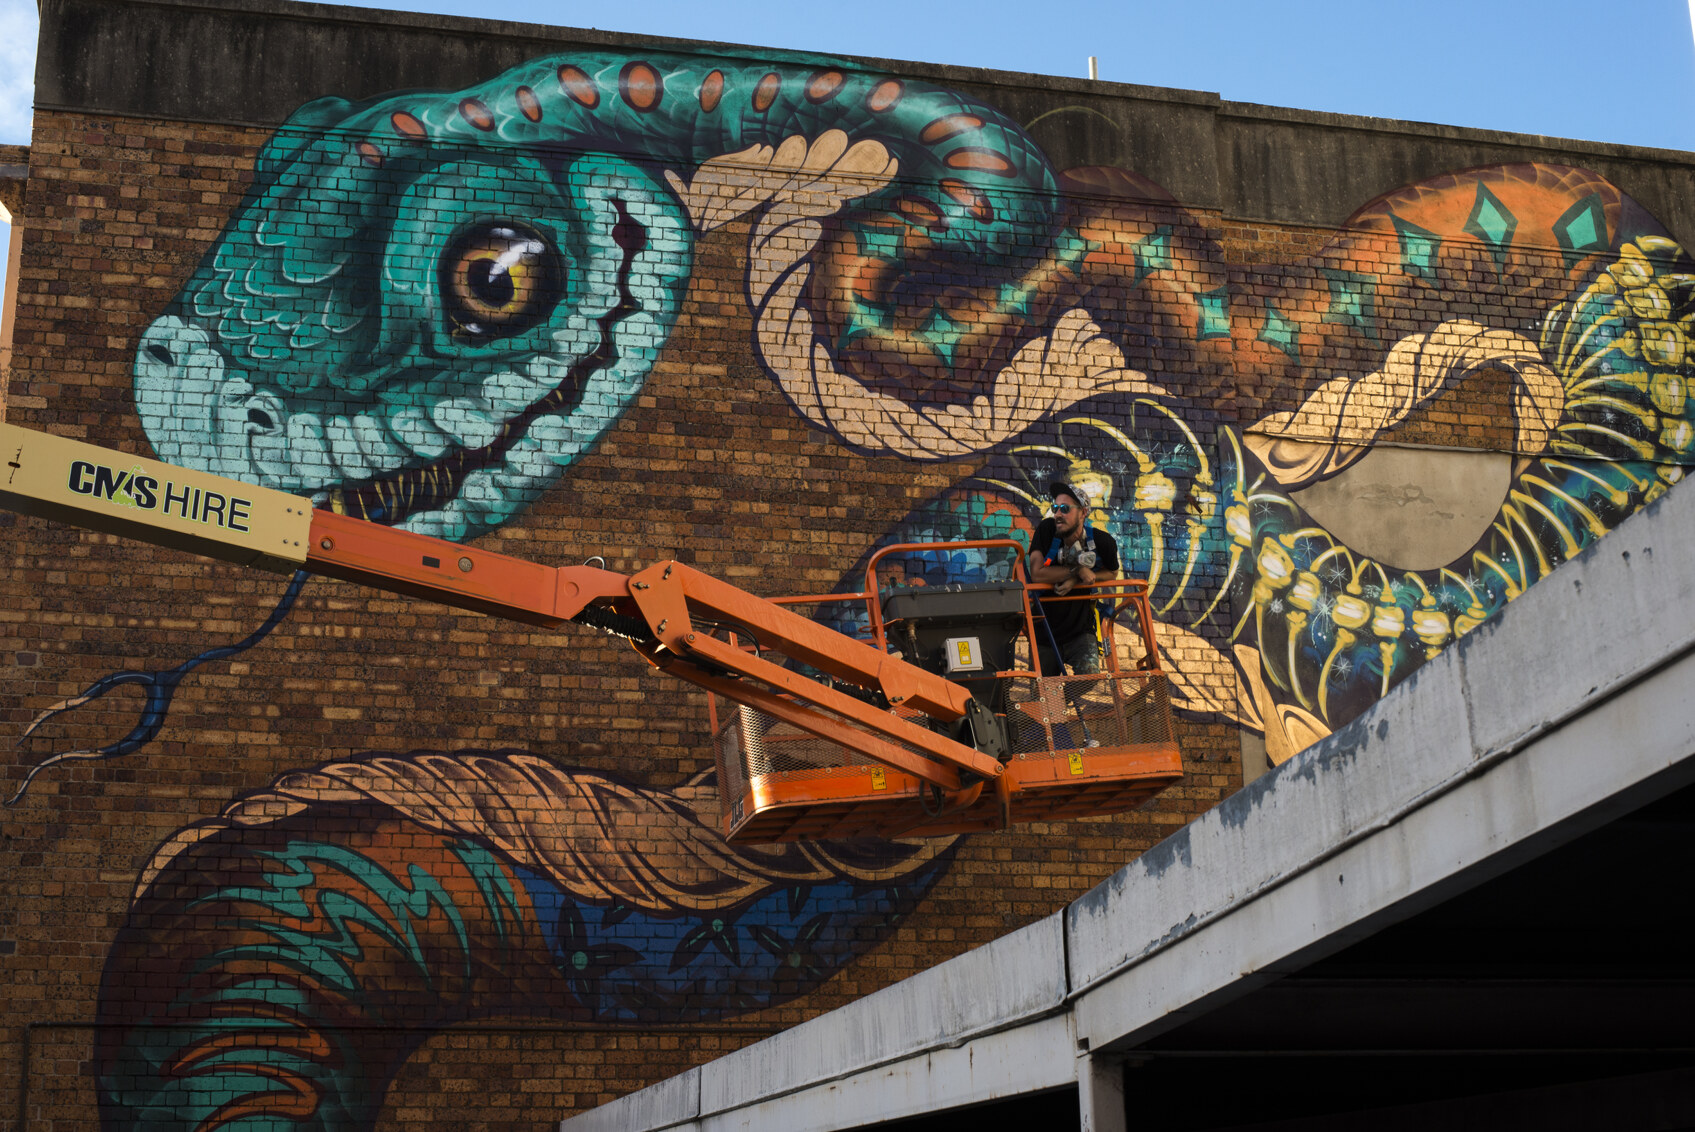 A snake being painted onto a brick wall by a man in a cherry picker street art Toowoomba Queensland